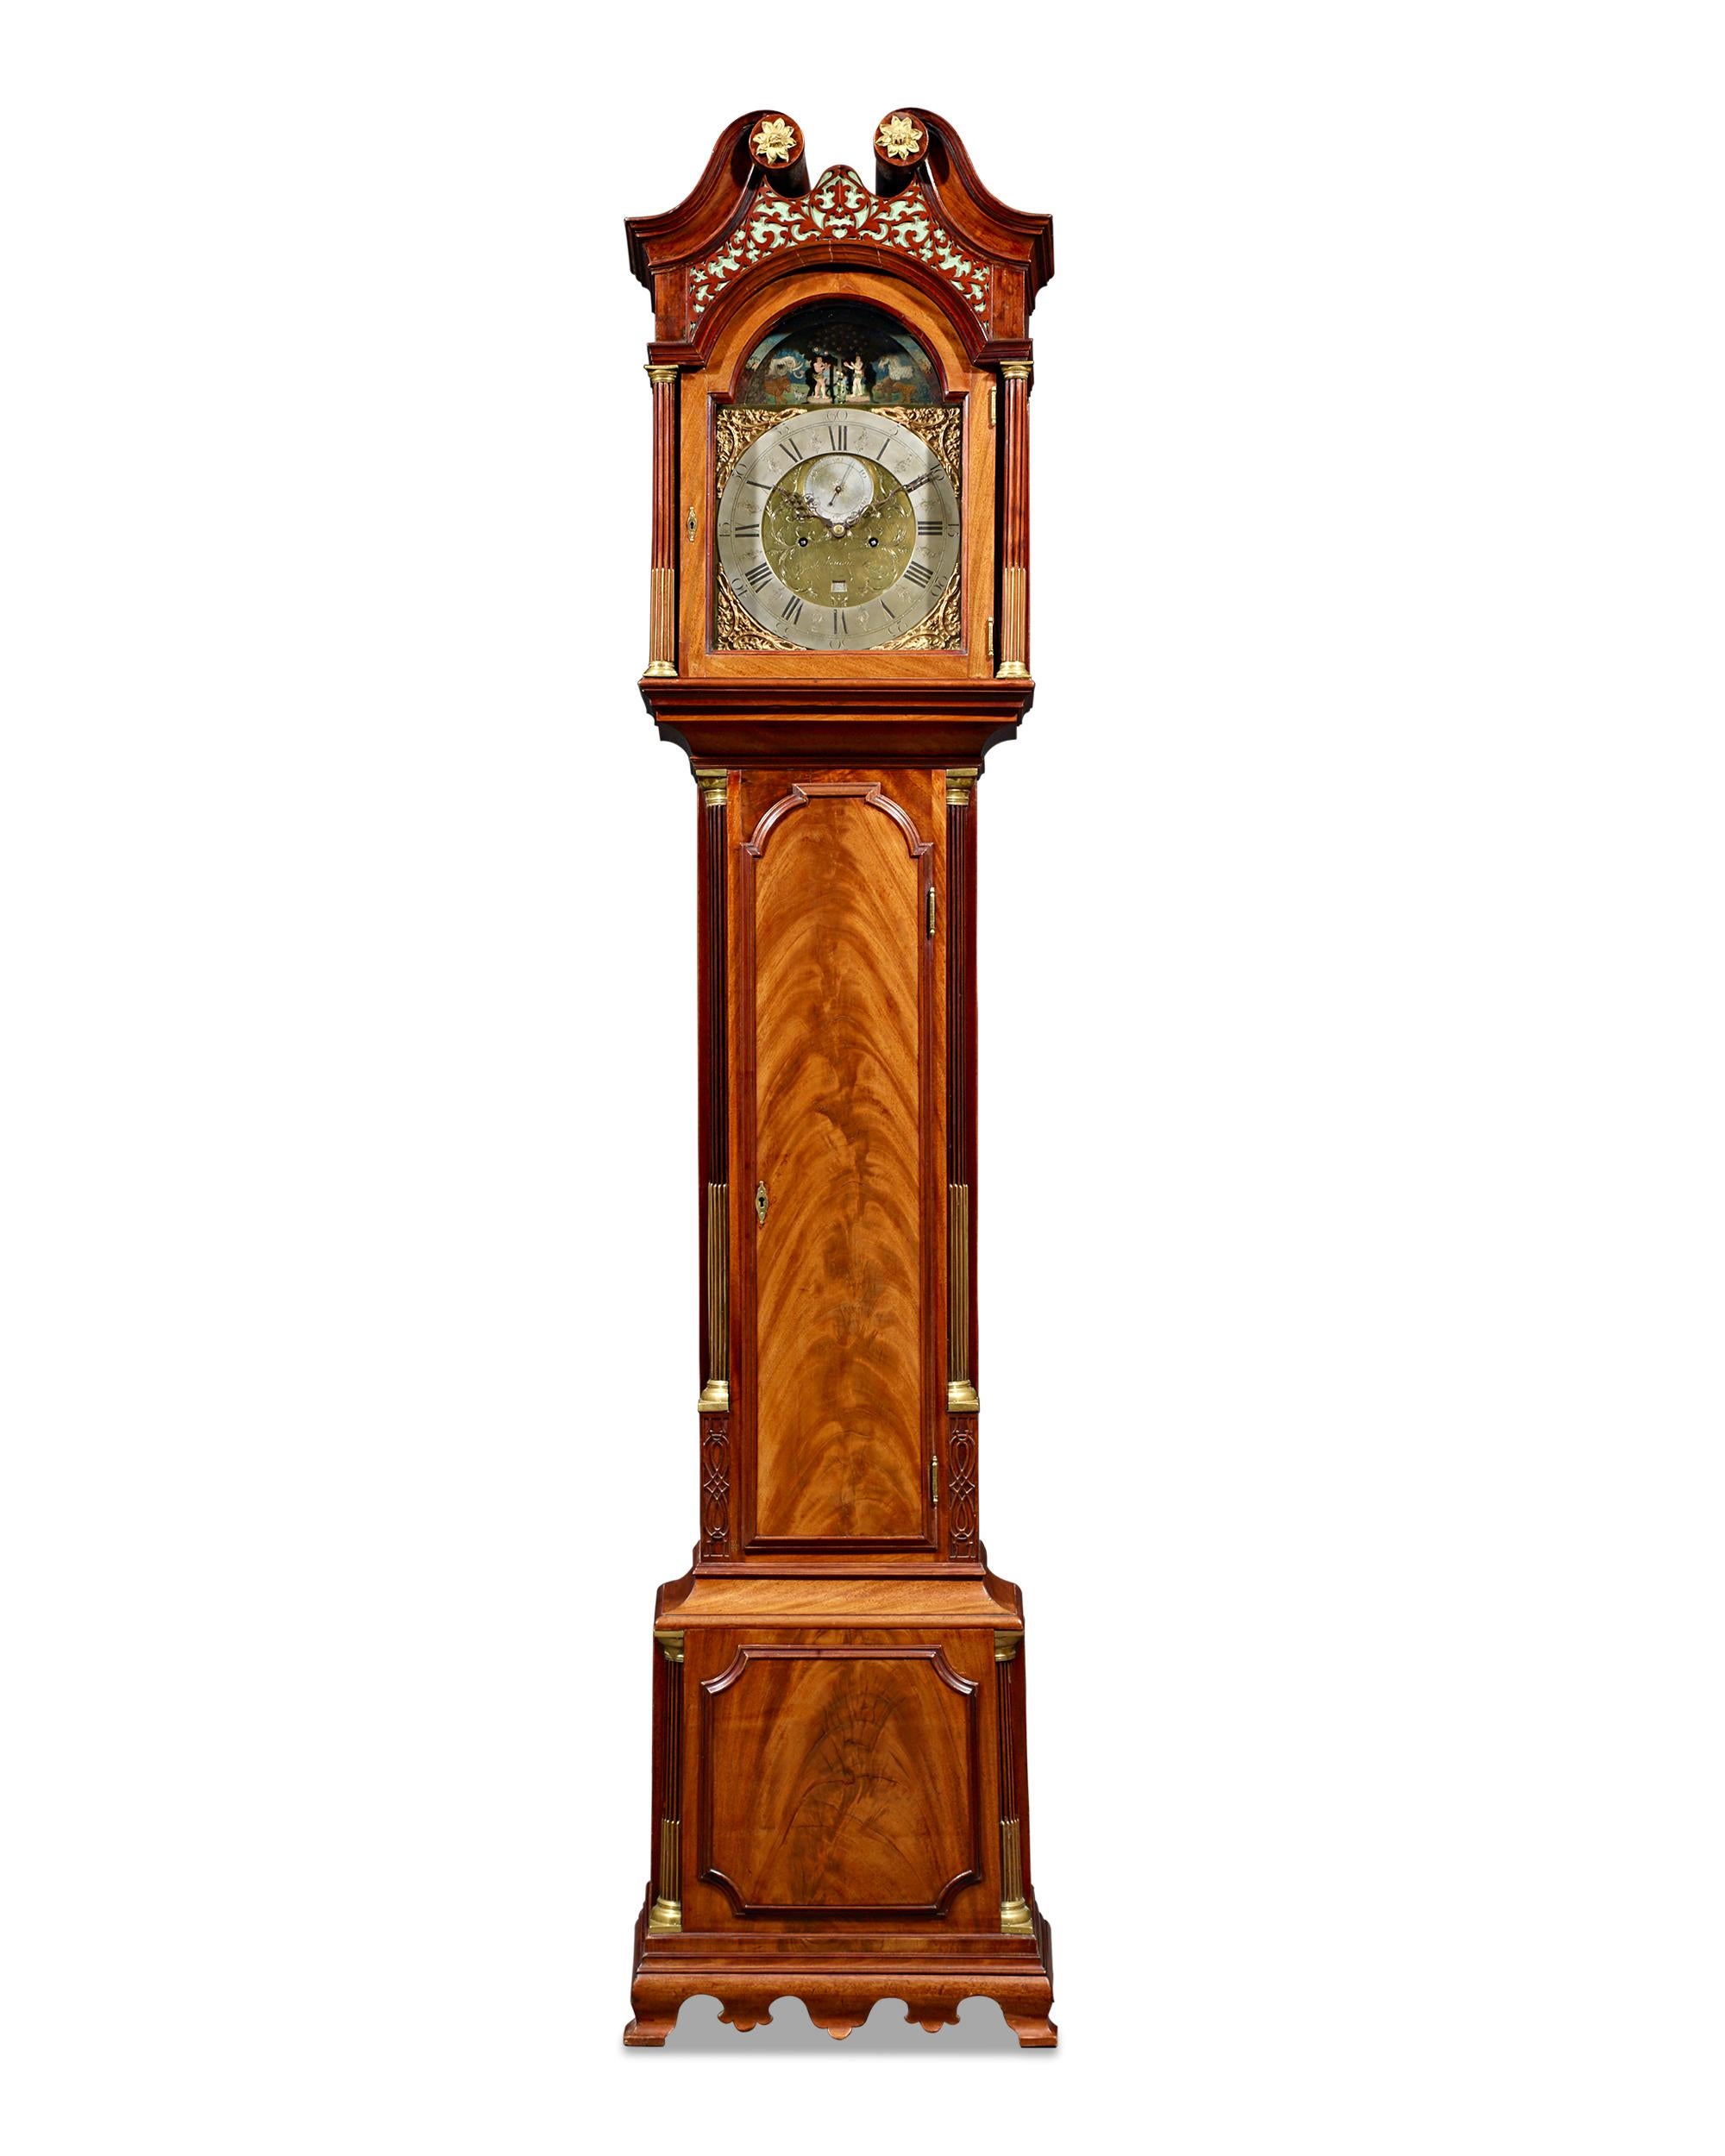 A majestic specimen of English clockmaking, this important longcase clock by London clockmaker James Fenton features an exceptional Adam and Eve automaton above the dial. Longcase timepieces that combine the mechanics of a clock with those of an